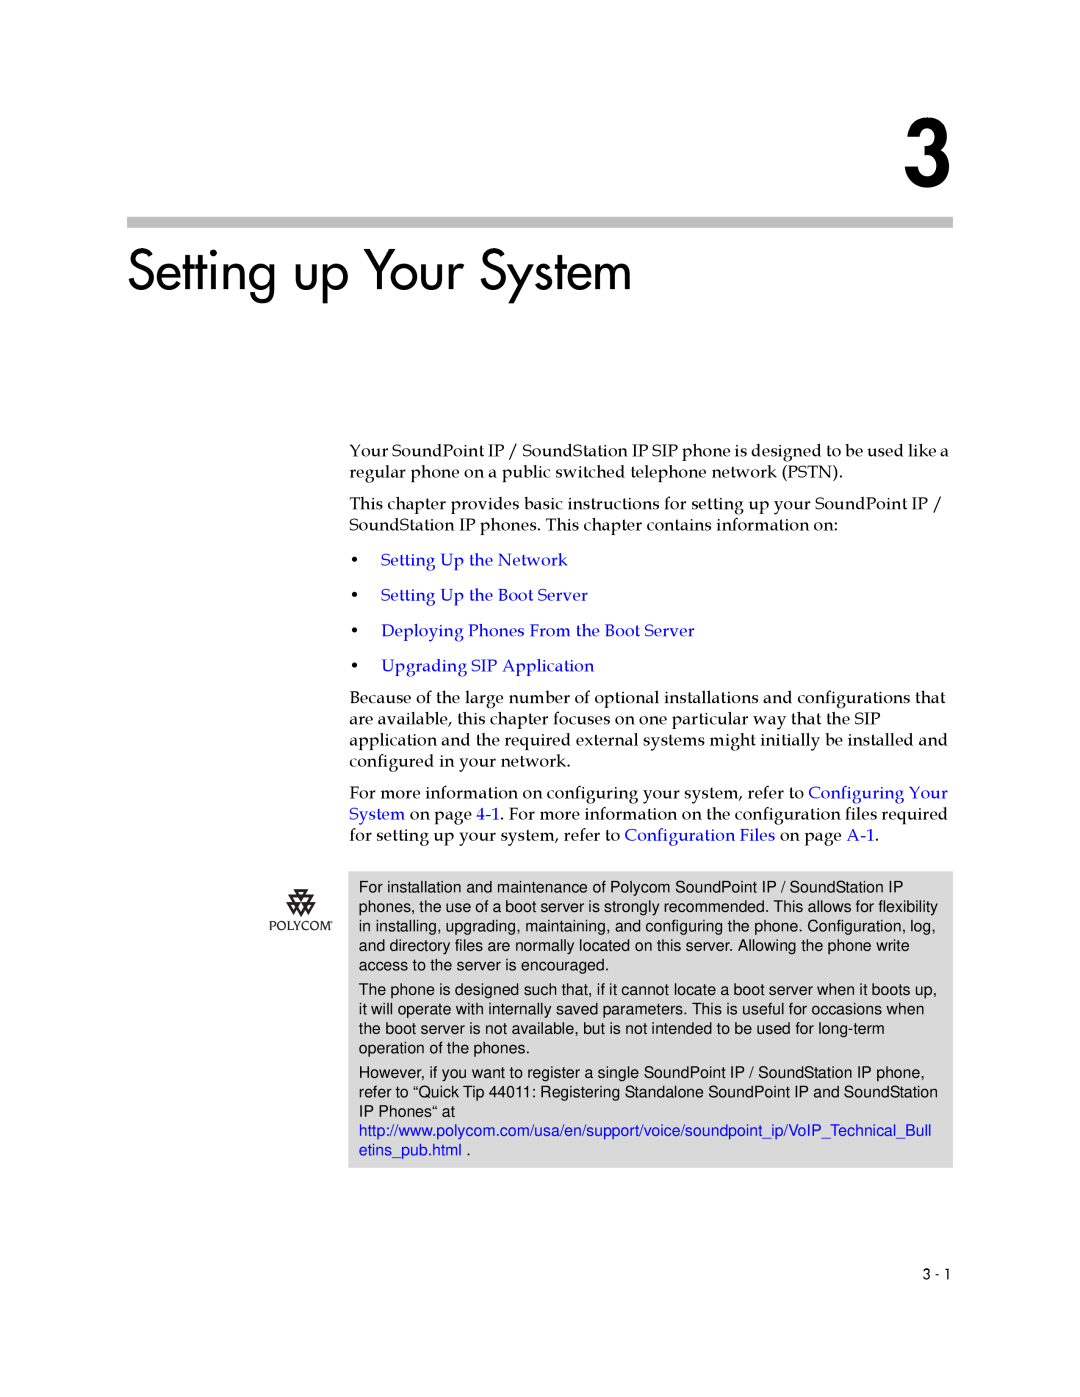 Polycom SIP 3.1 manual Setting up Your System, Setting Up the Network Setting Up the Boot Server 